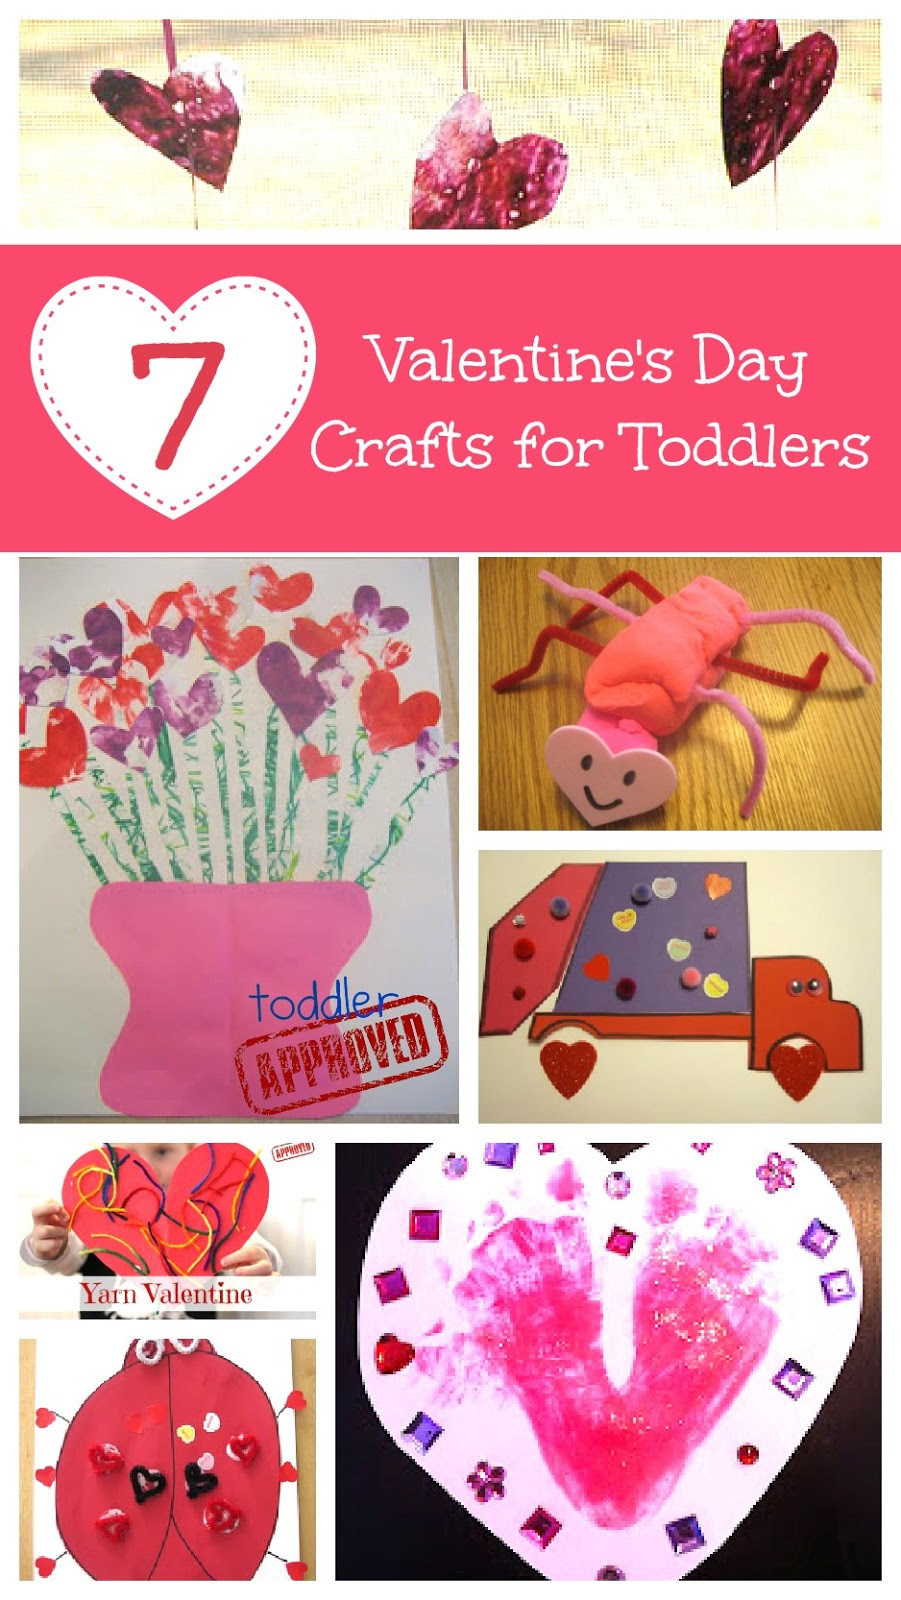 Valentines Day Ideas For Toddlers
 Toddler Approved 7 Valentine s Day Crafts for Toddlers